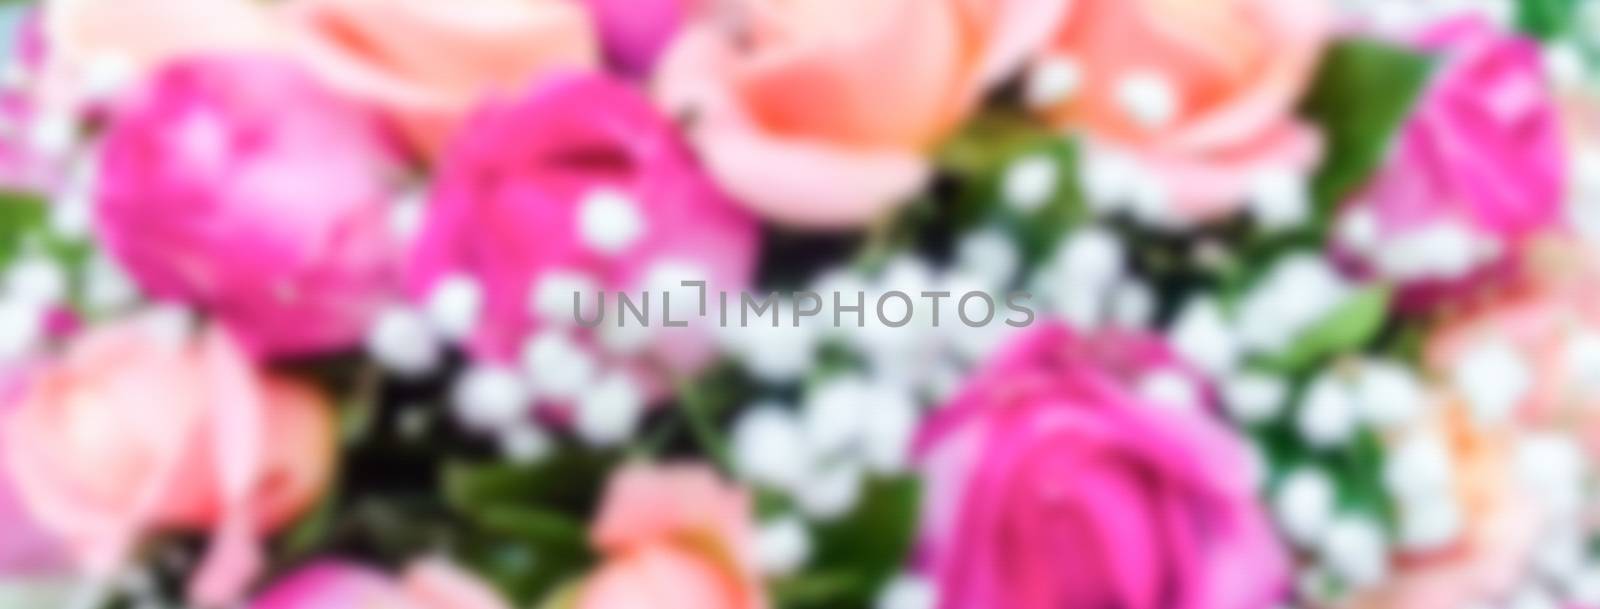 Defocused background with bouquet of roses. Intentionally blurred post production for bokeh effect